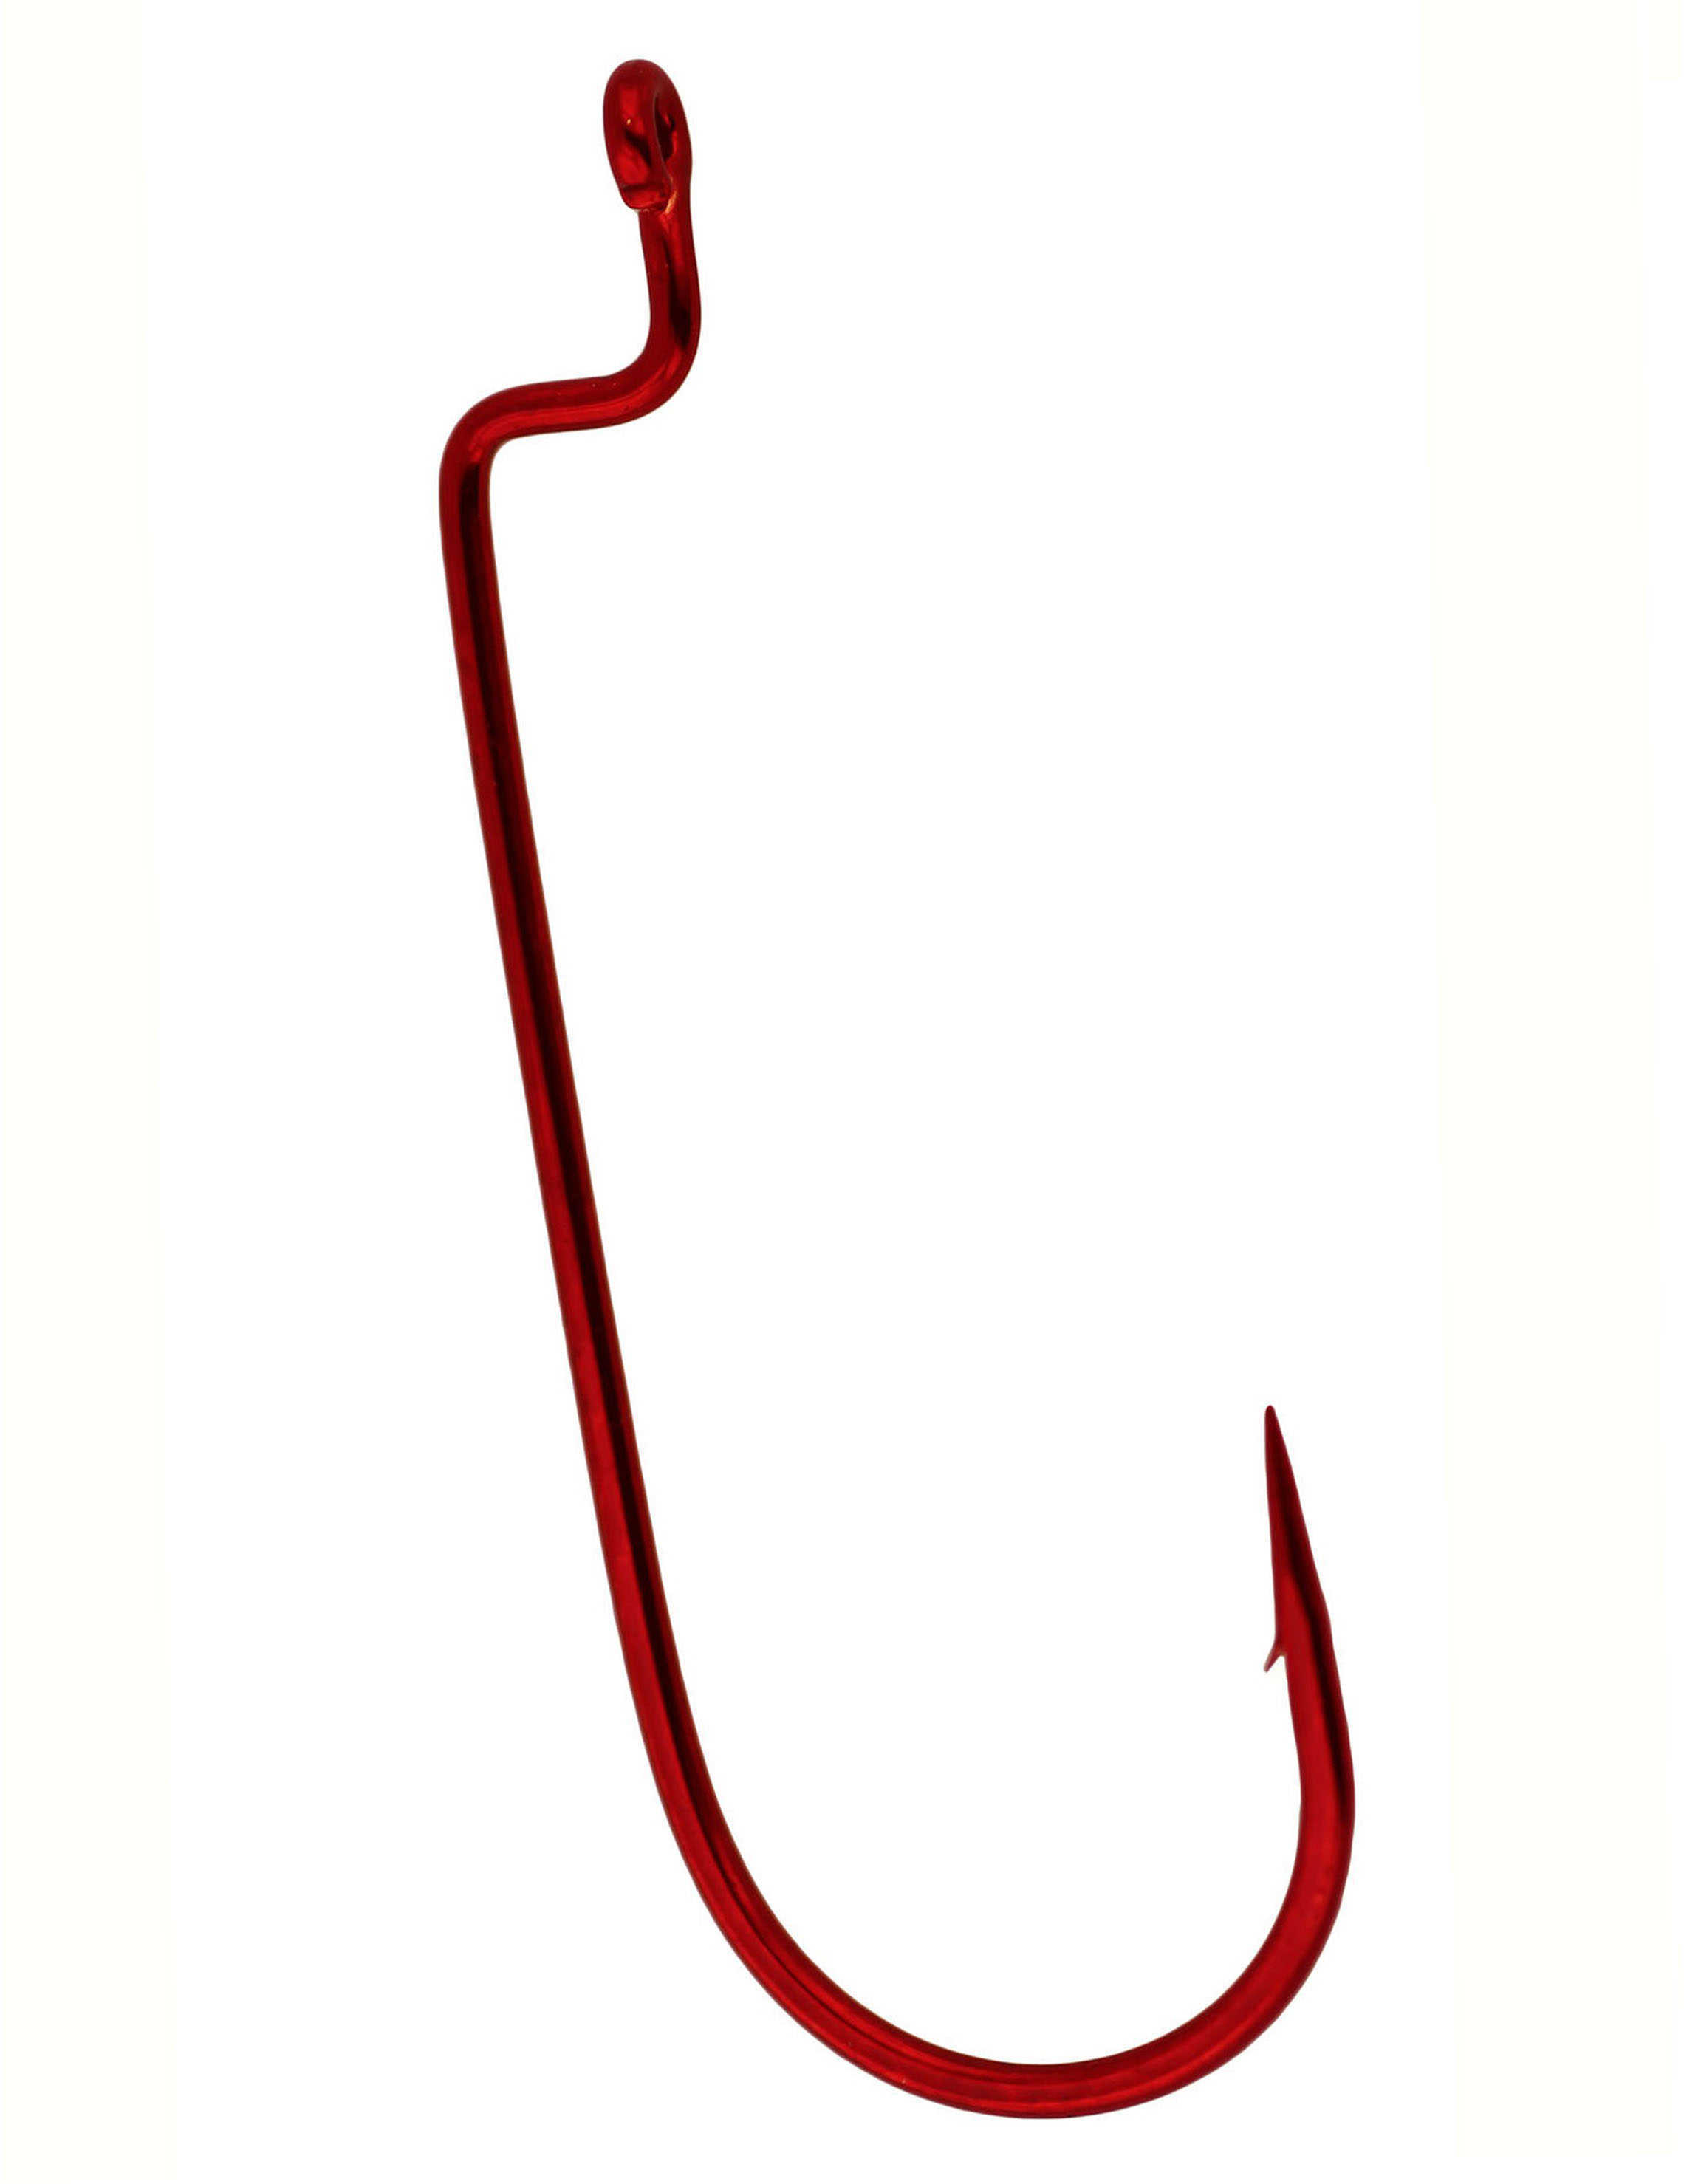 Gamakatsu / Spro Worm Offset Round Bend Hook, Red Size 2/0 Md: 54312